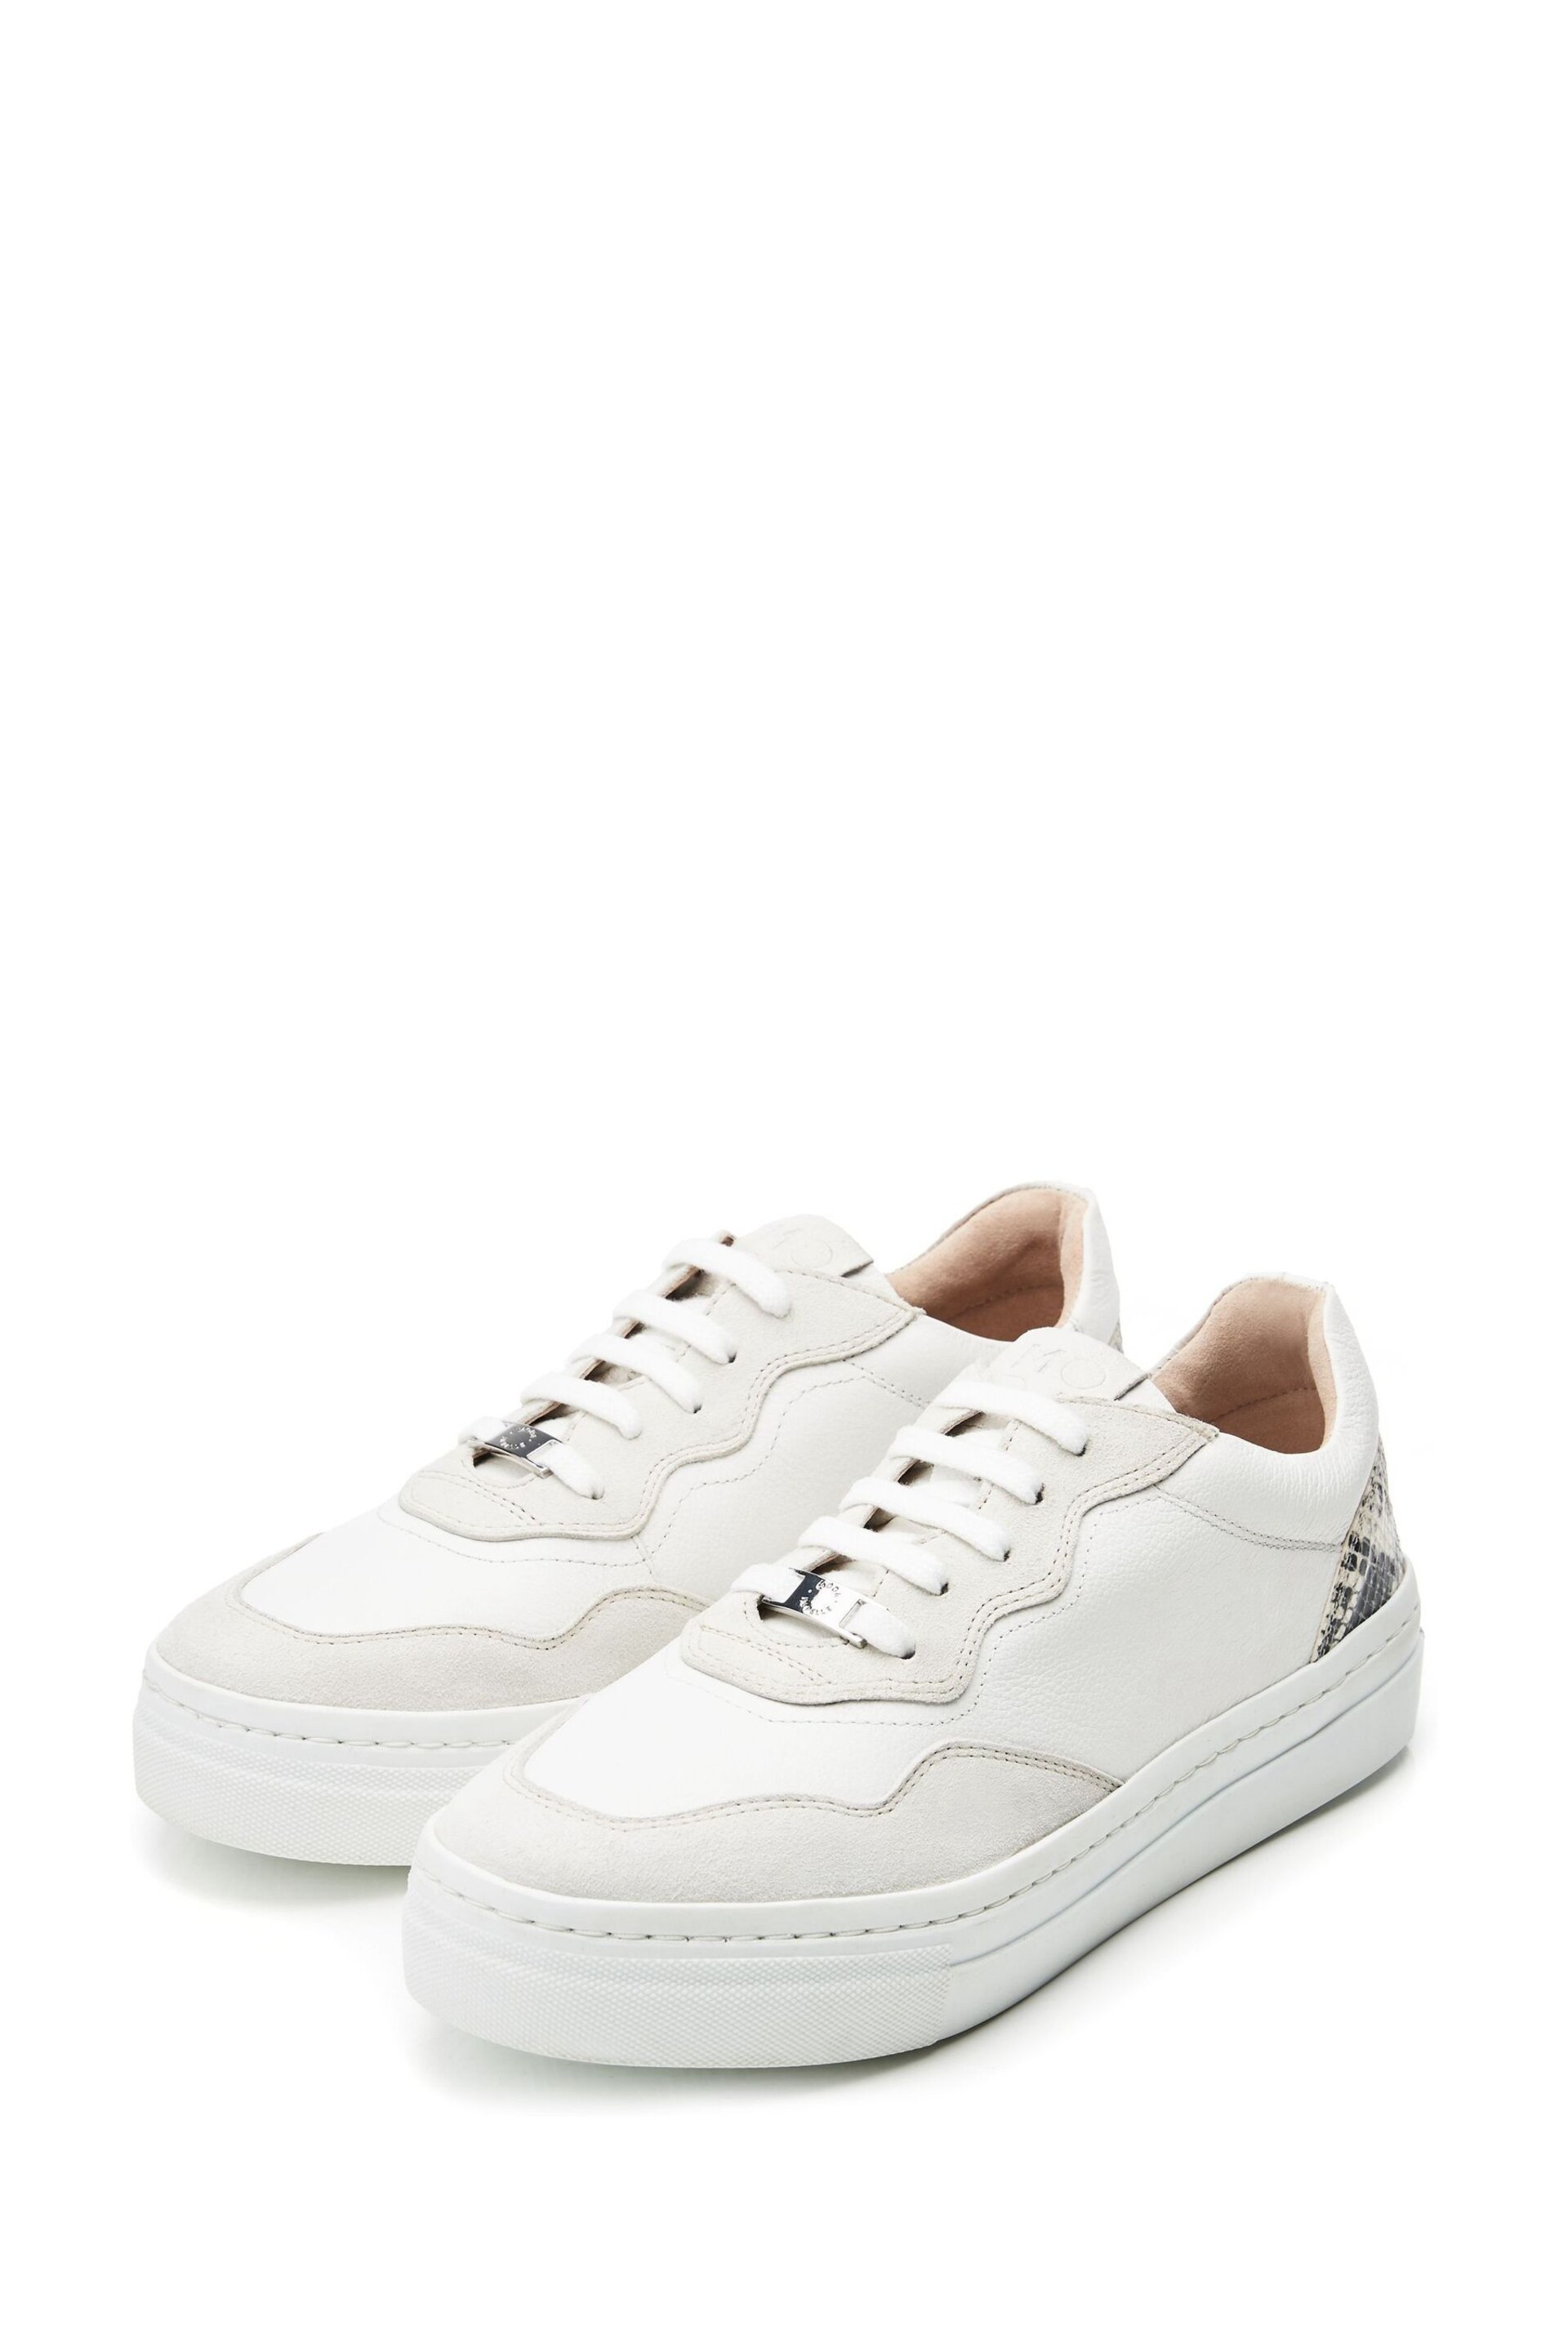 Moda in Pelle Adalaya Scallop Chunky White Trainers - Image 2 of 4